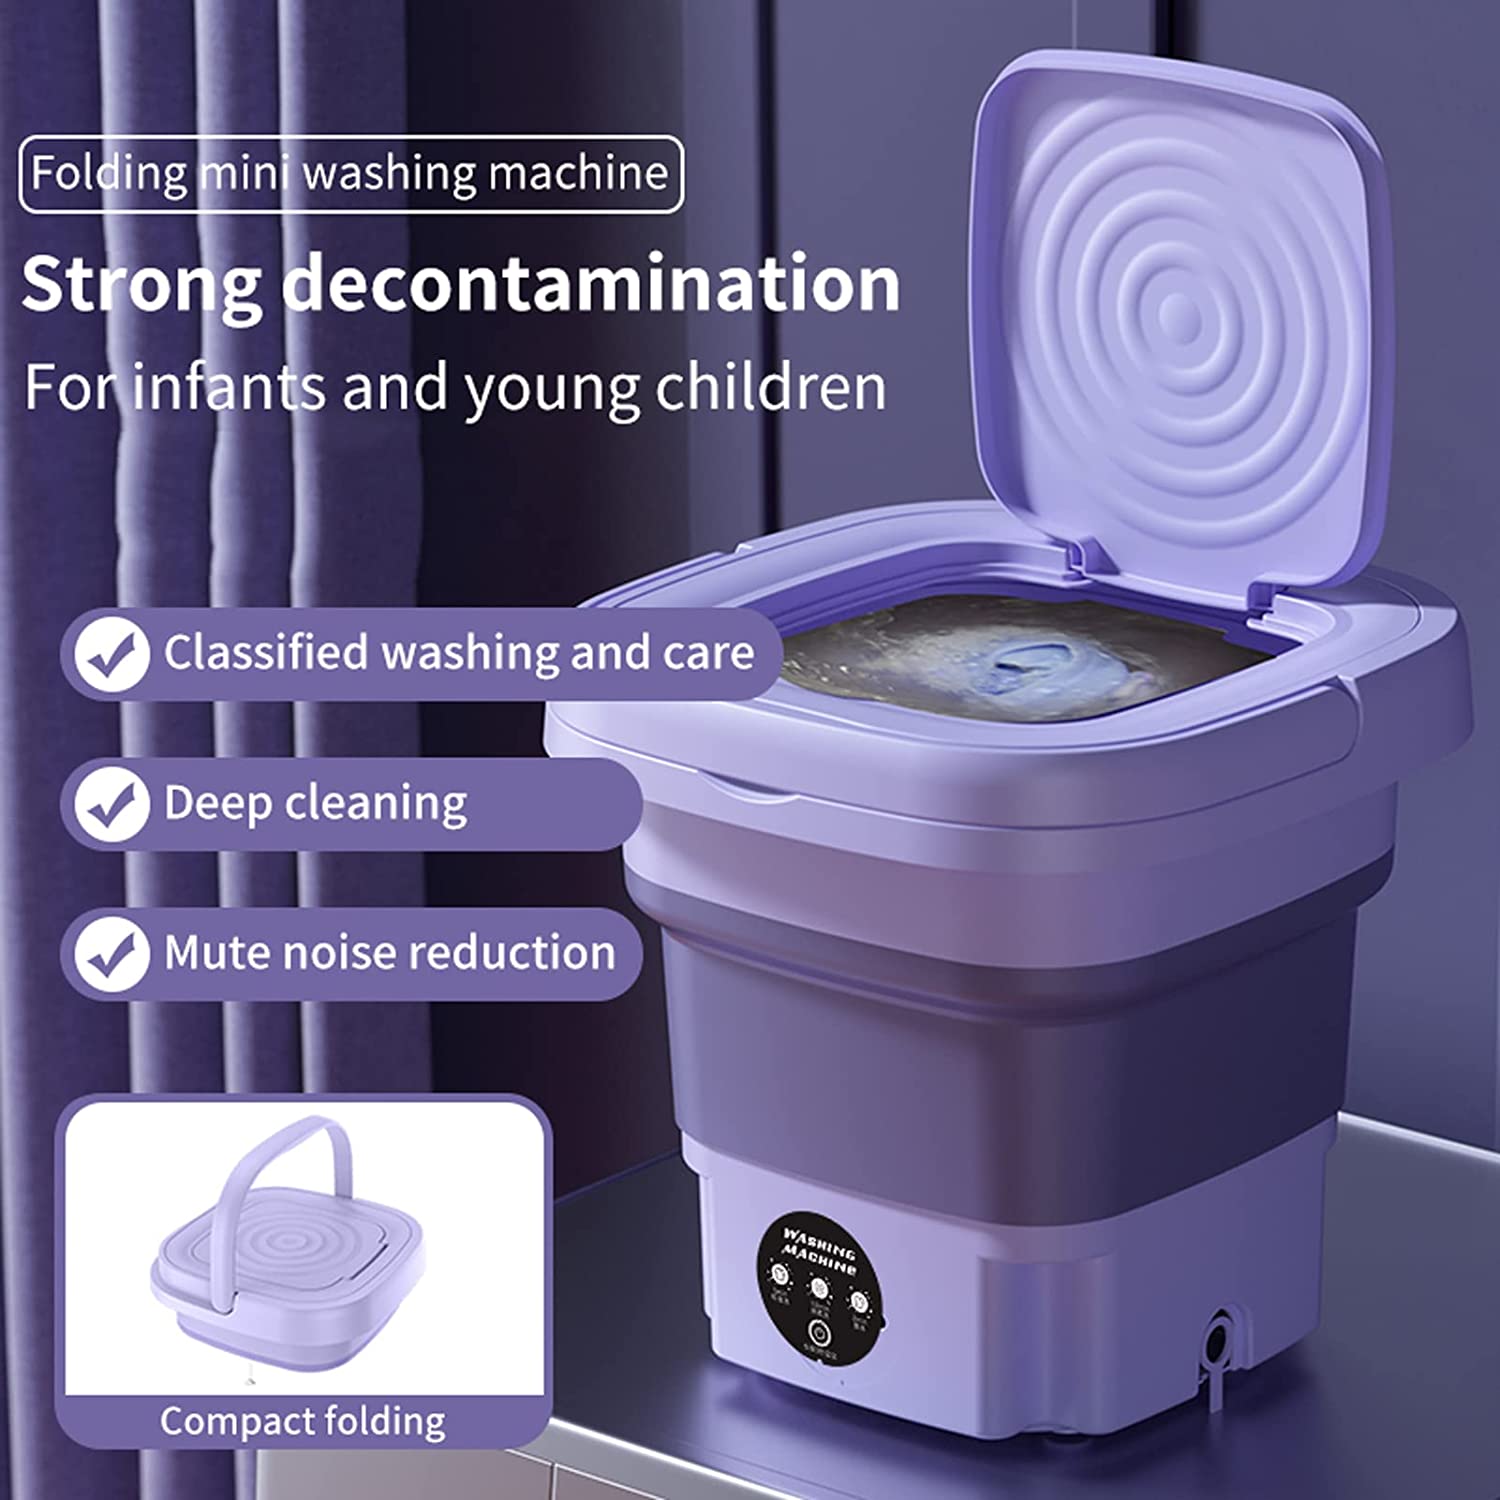 Portable Washing Machine, High Capacity Mini Washer with 3 Modes Deep Cleaning Half Automatic Washt, Foldable Washing Machine with Soft Spin Dry for Socks, Baby Clothes, Towels, Delicate Items